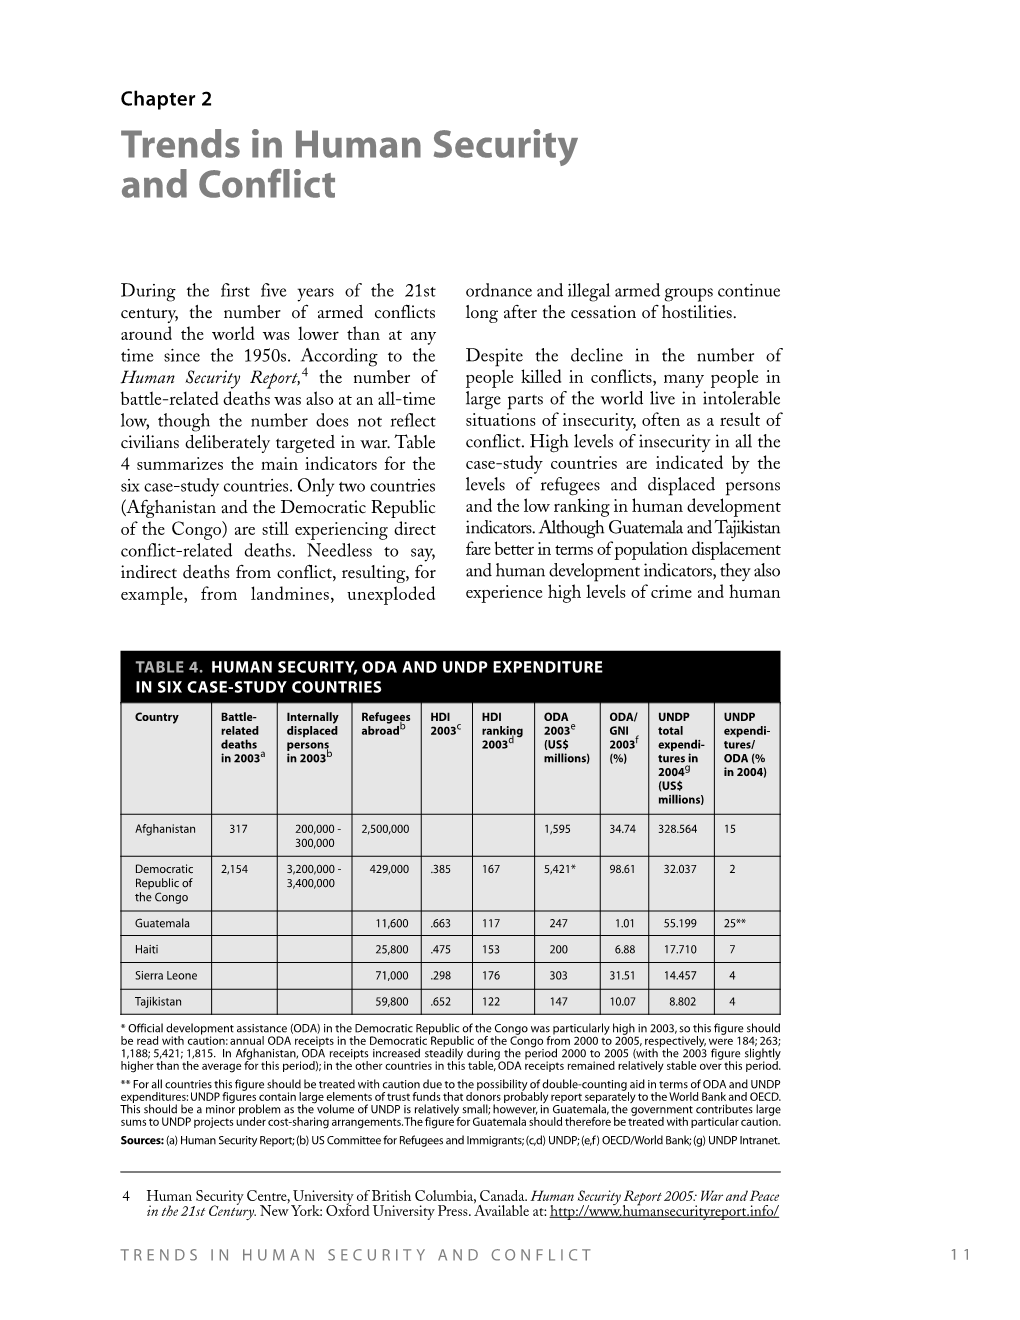 Trends in Human Security and Conflict